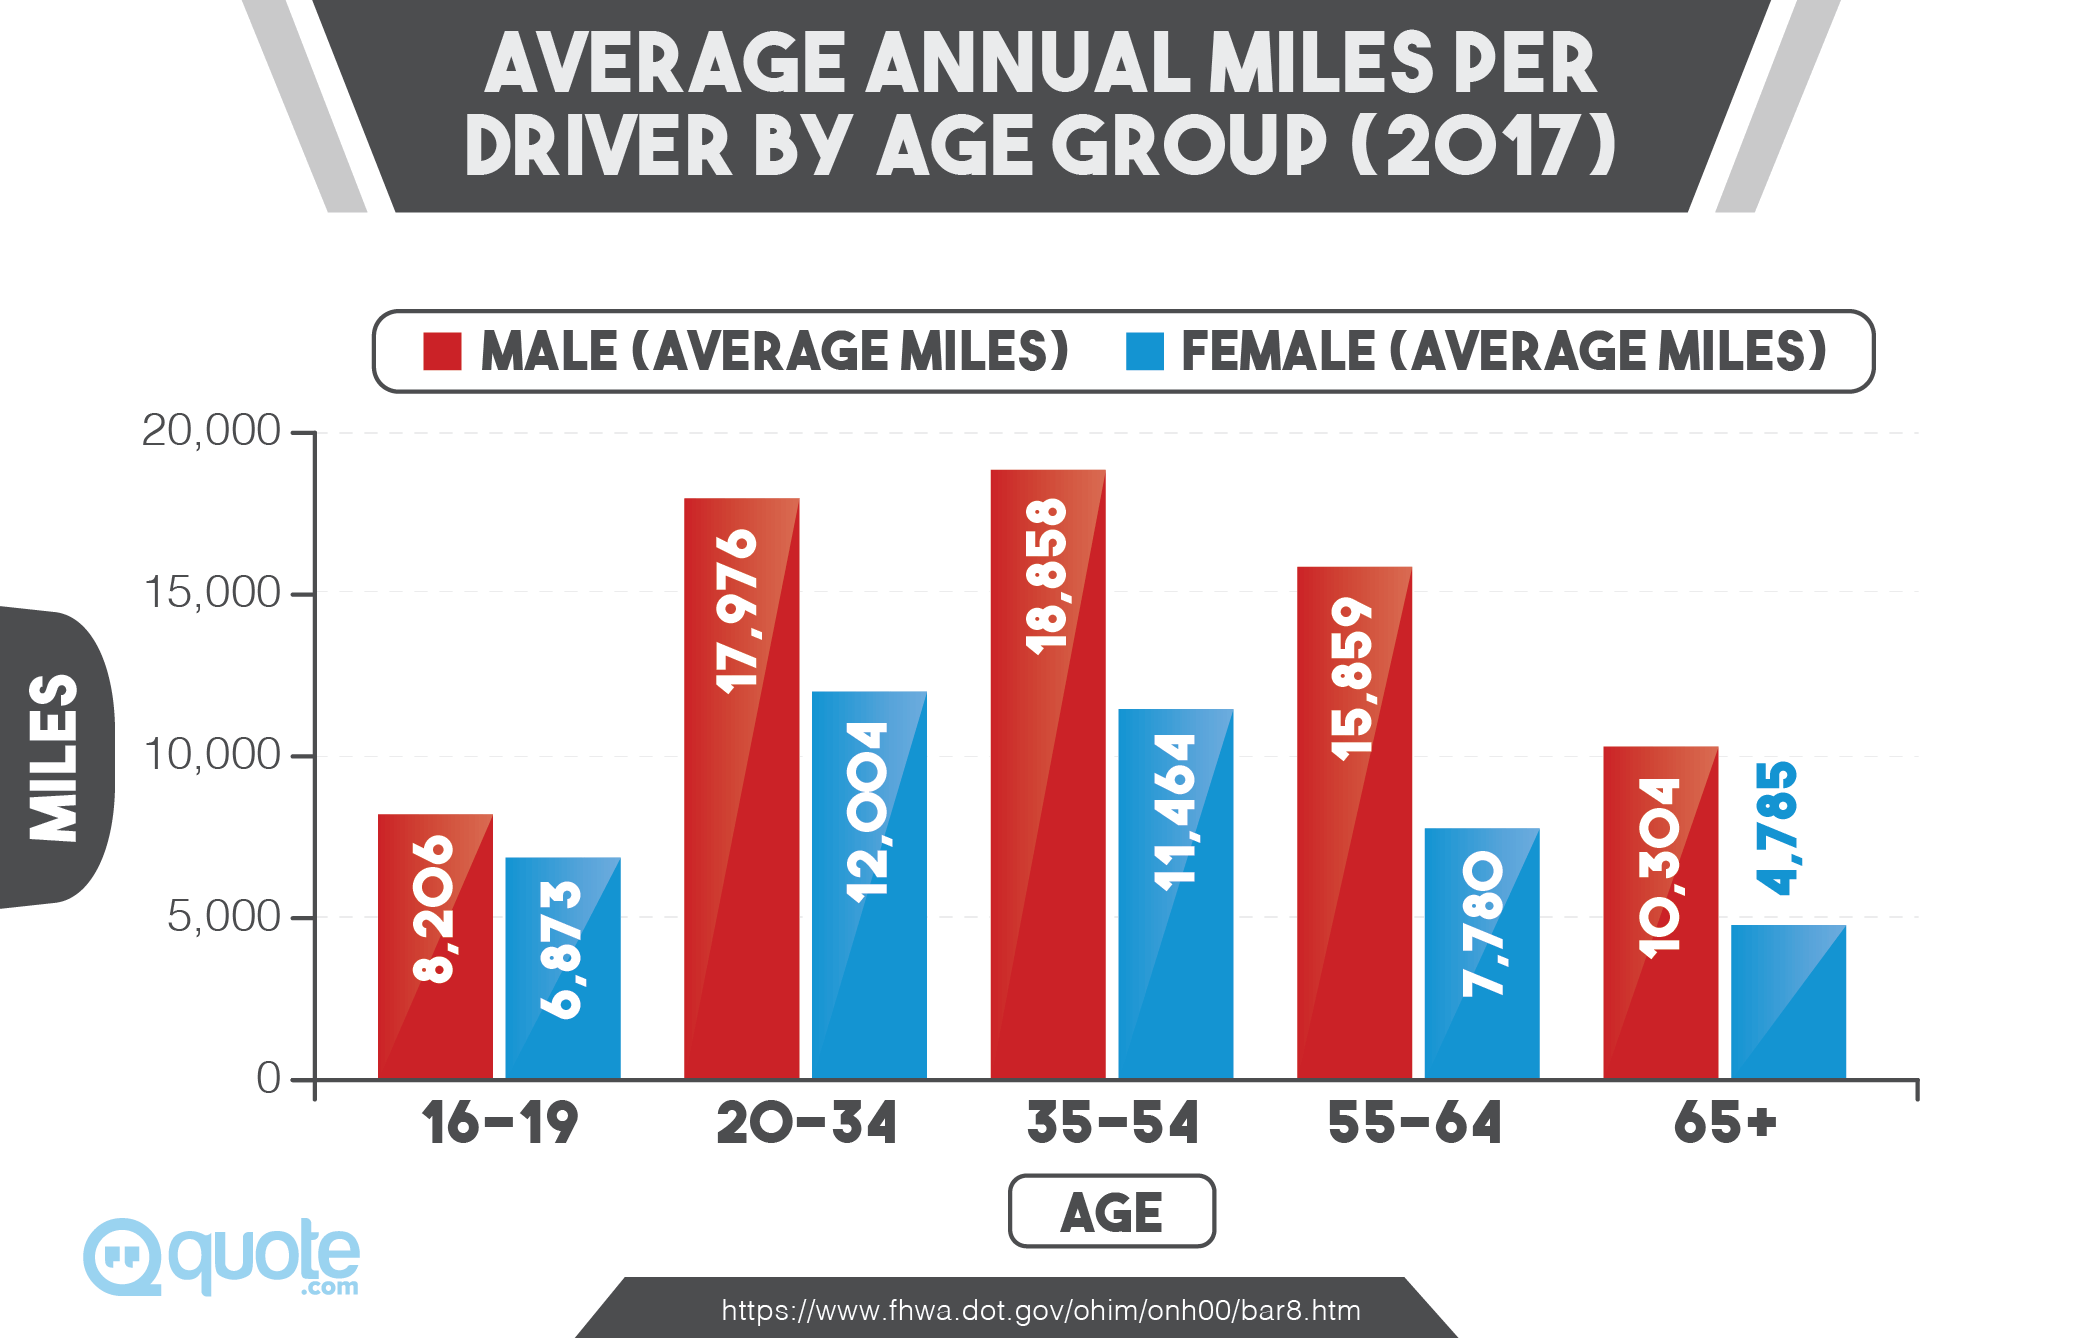 Average Annual Miles Per Driver by Age Group